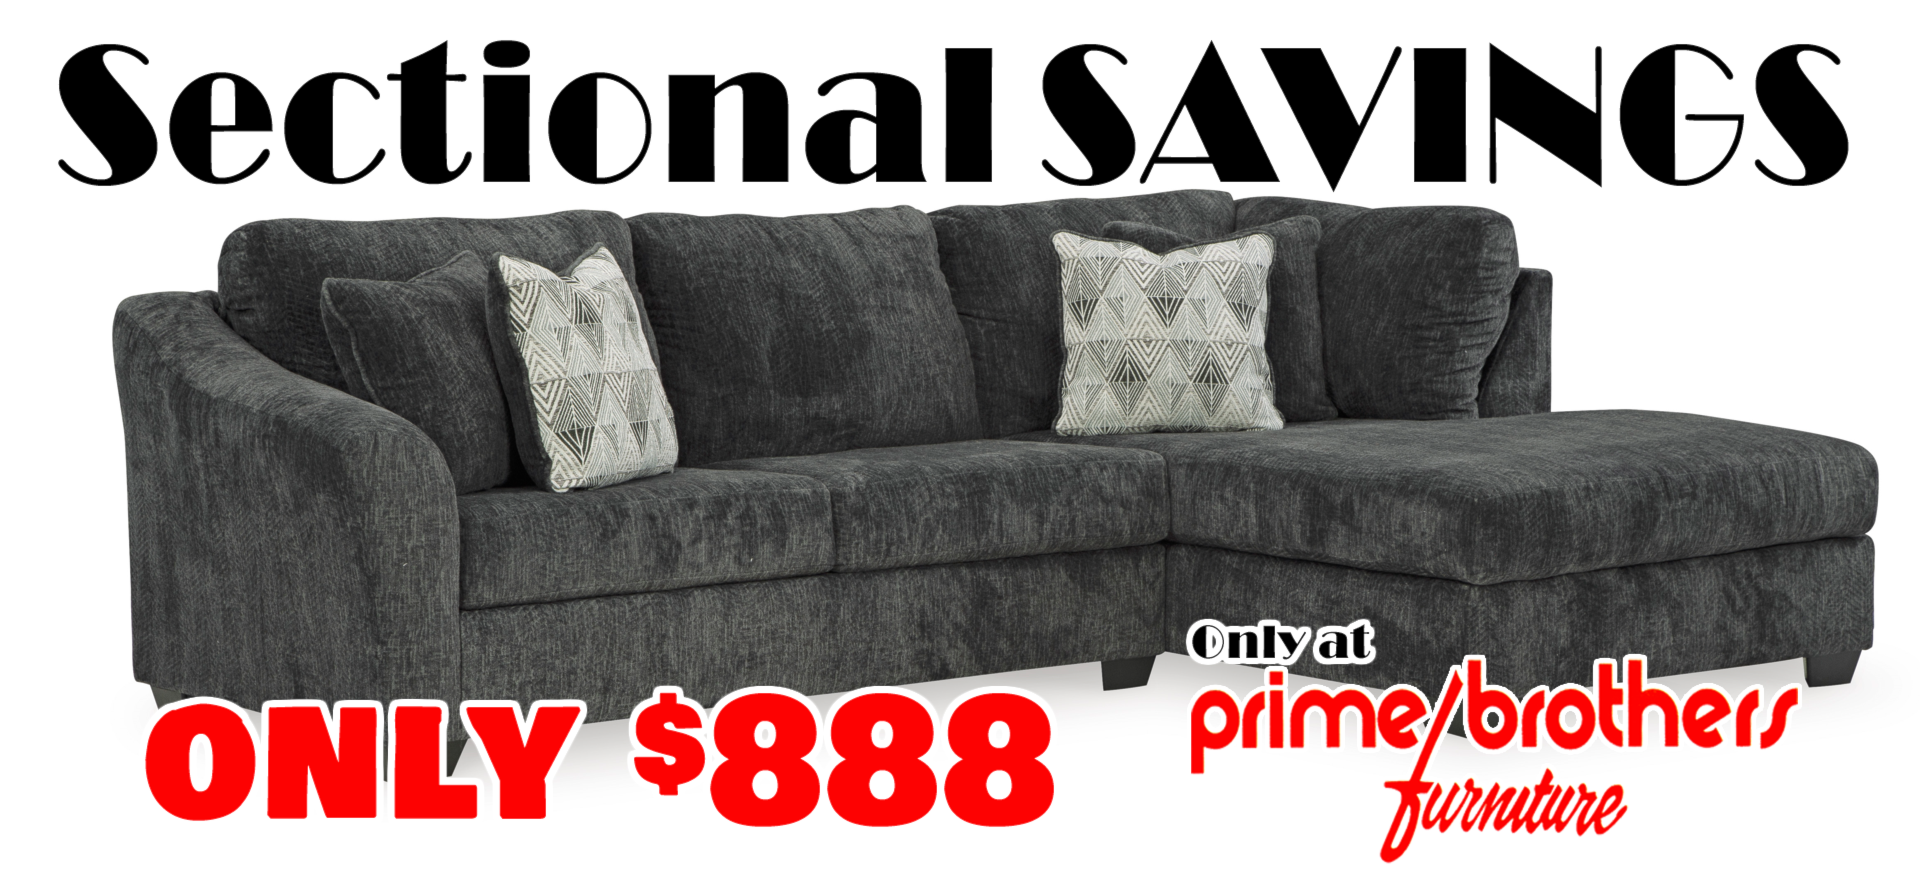 Sectional Savings - only $888